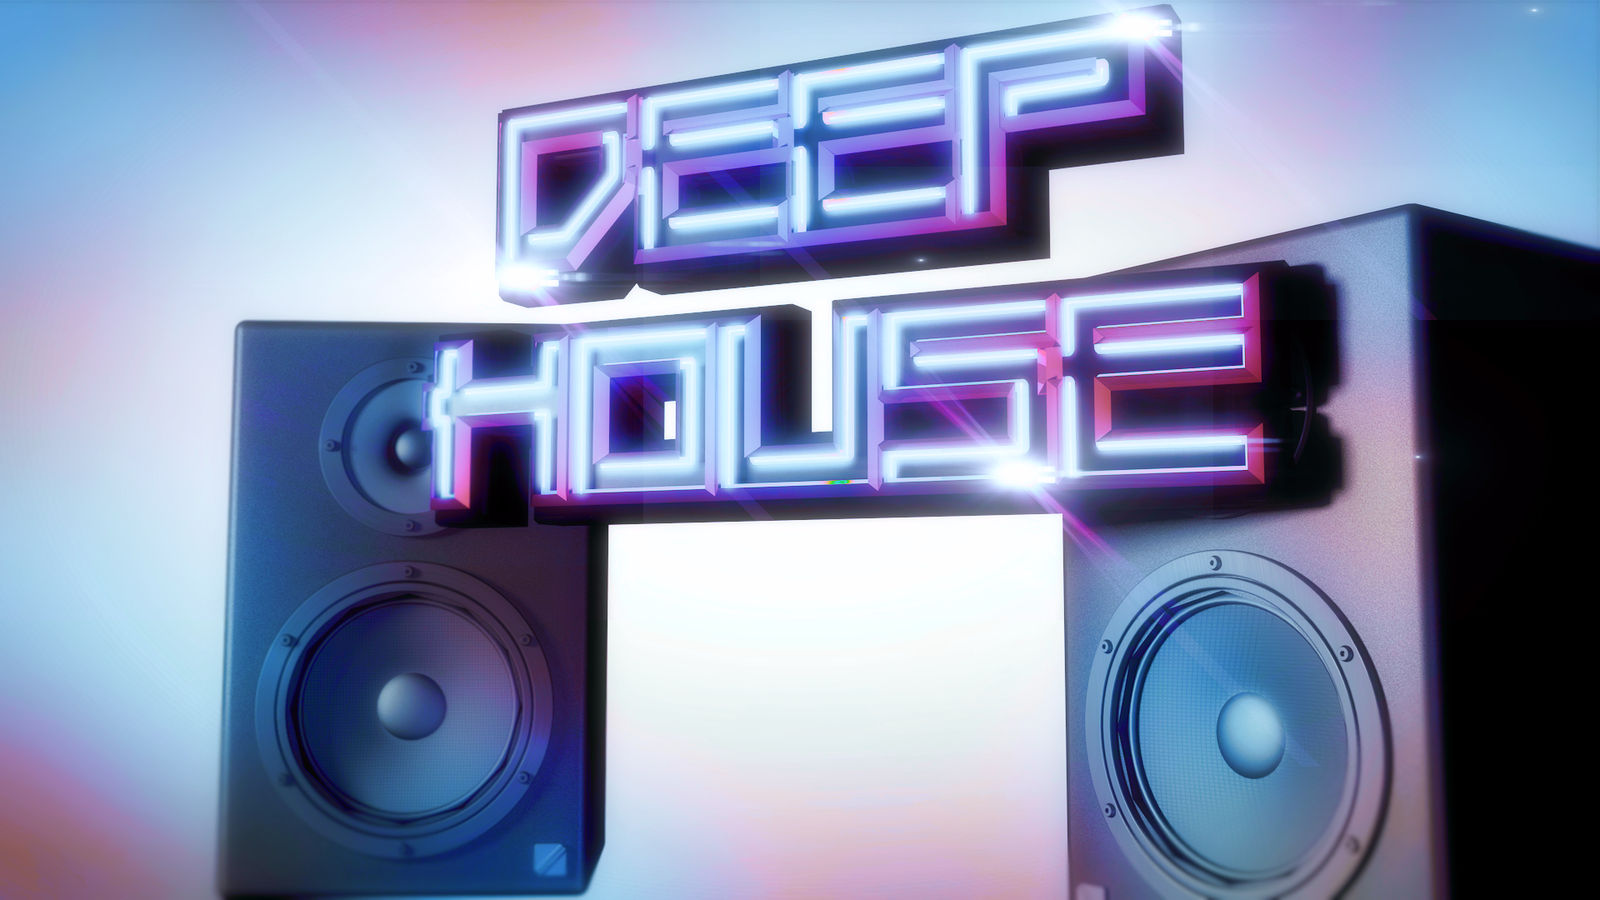 Electro House Hd Wallpapers